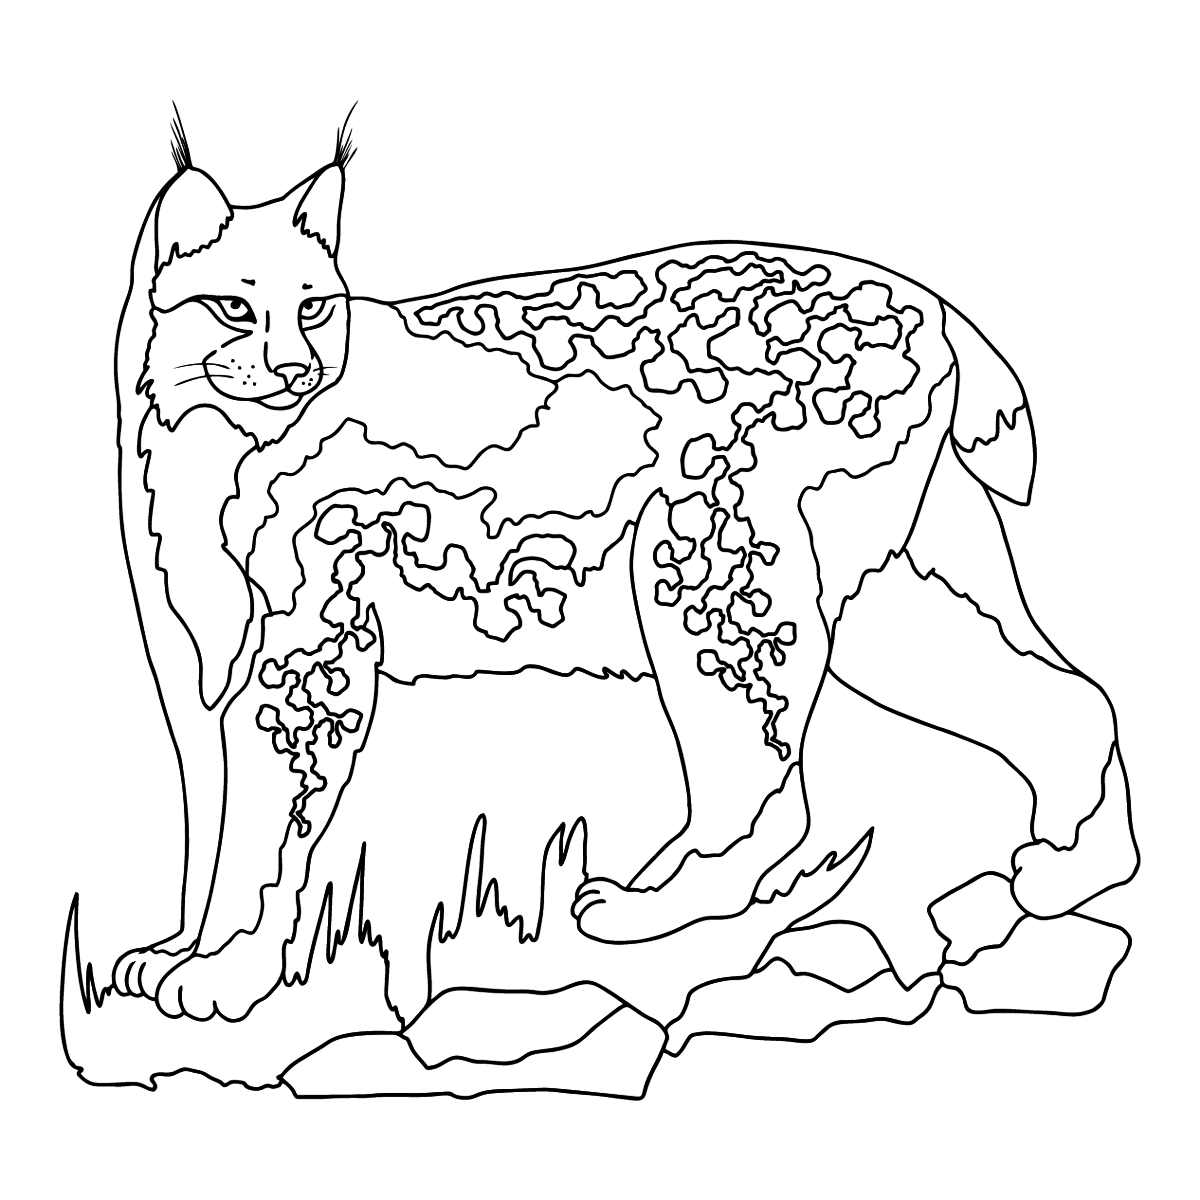 Coloring Page   A Lynx in the Forest ♥ Online and Print for Free